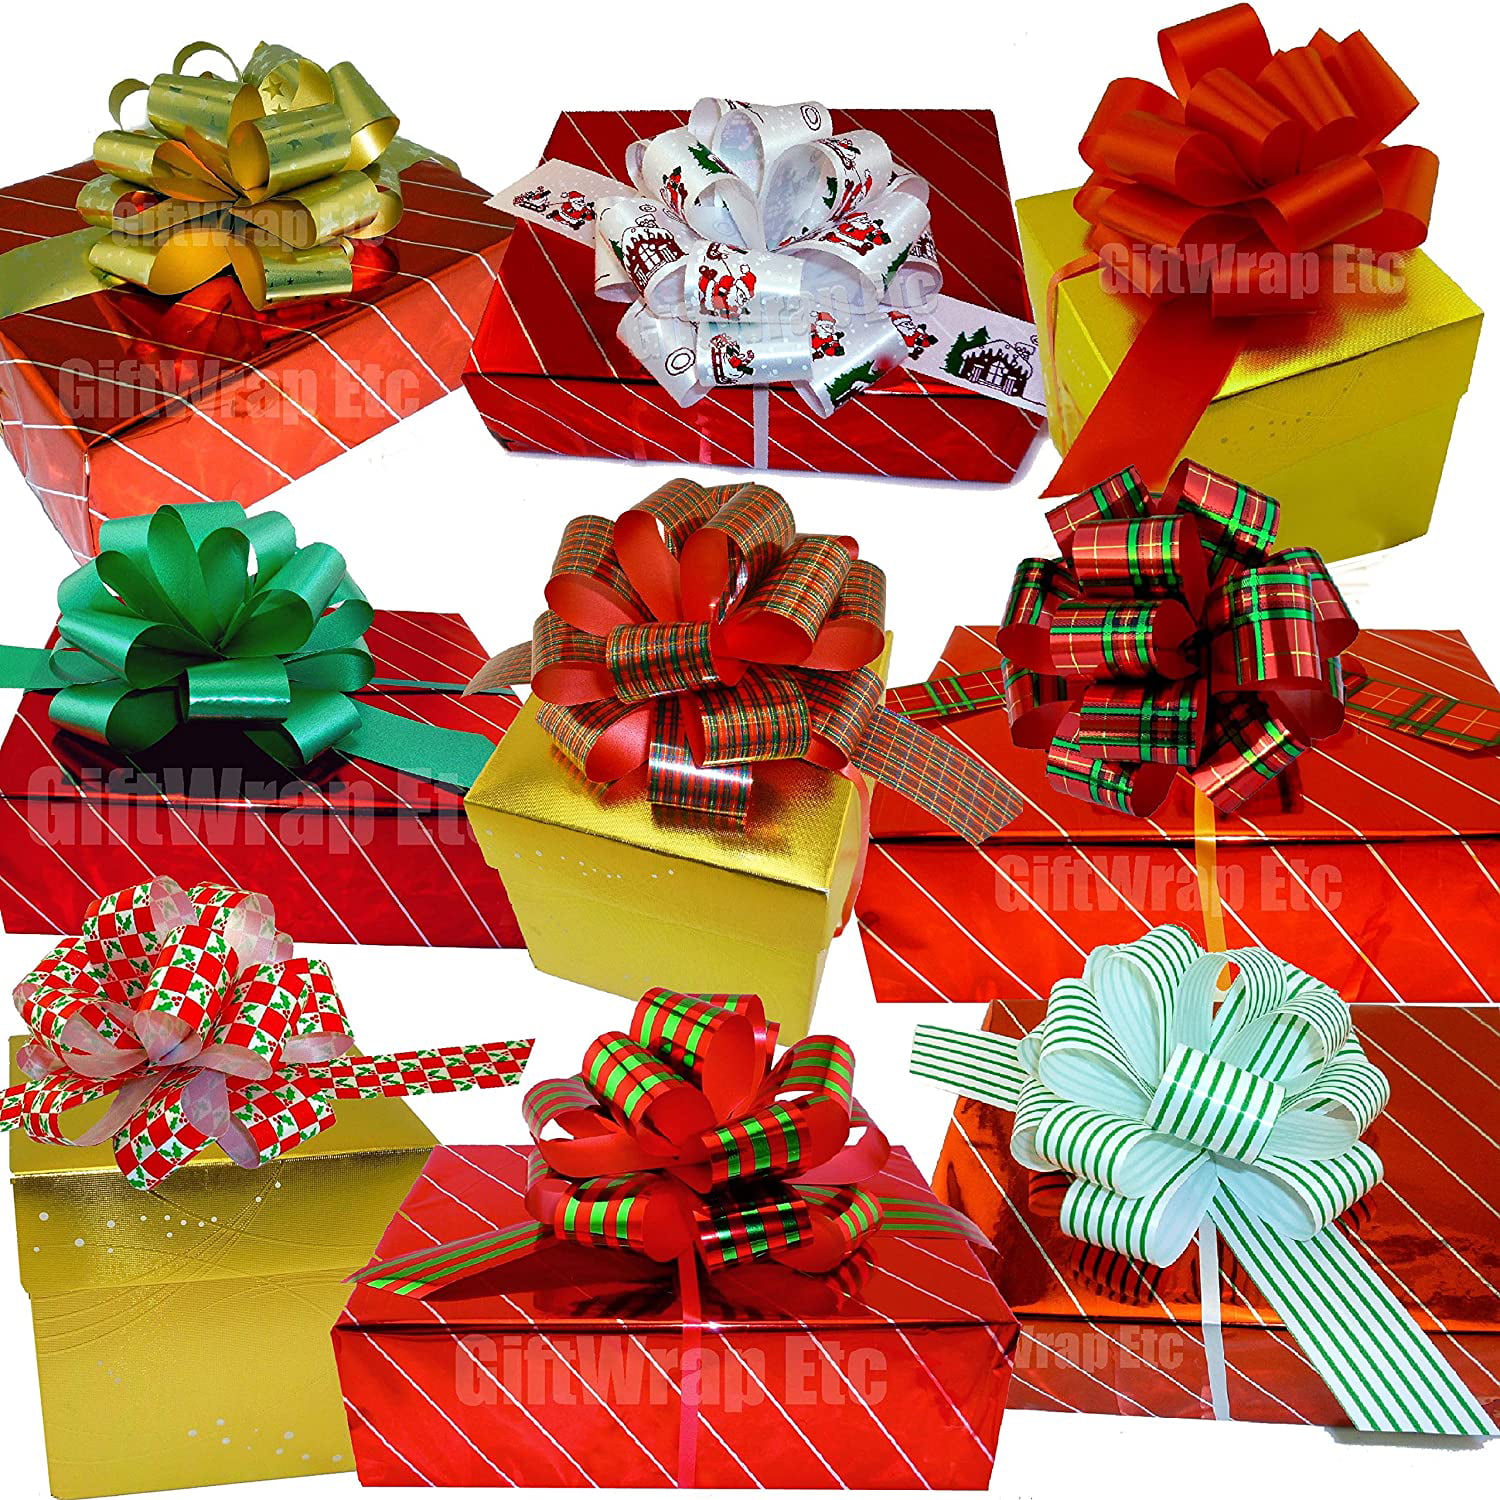 24 Christmas Gift Wrap Ribbon Pull Bows 5 ; Easy and Fast Gift Wrapping Accessory for Christmas Bows Baskets Wine Bottles Gifts Decoration Present Decor. Gift Wrapping 